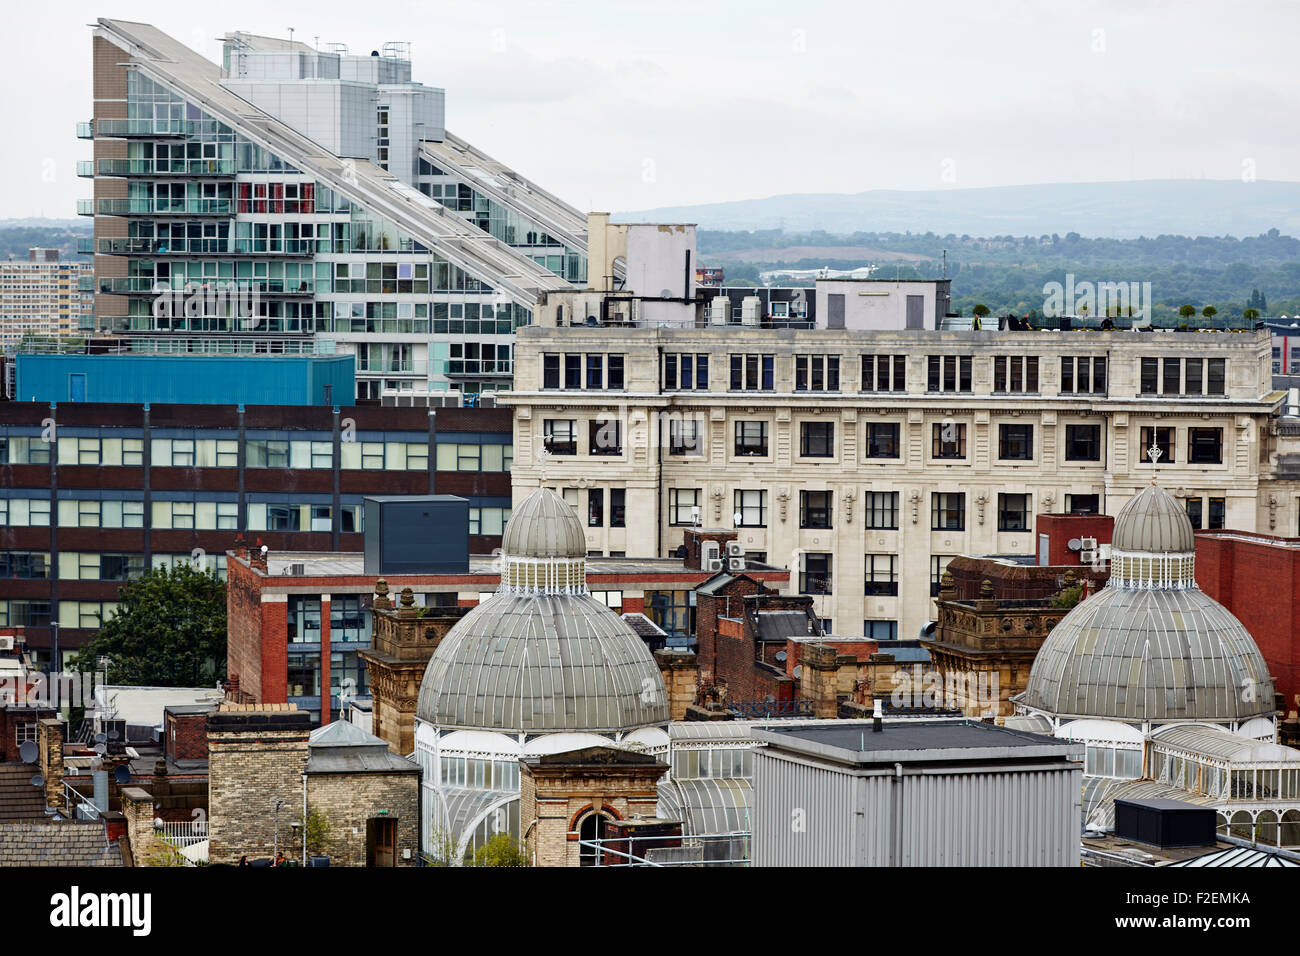 The roof top domes of Barton Arcade in Manchester UK  Barton Arcade is a Victorian shopping arcade in Manchester, England, locat Stock Photo